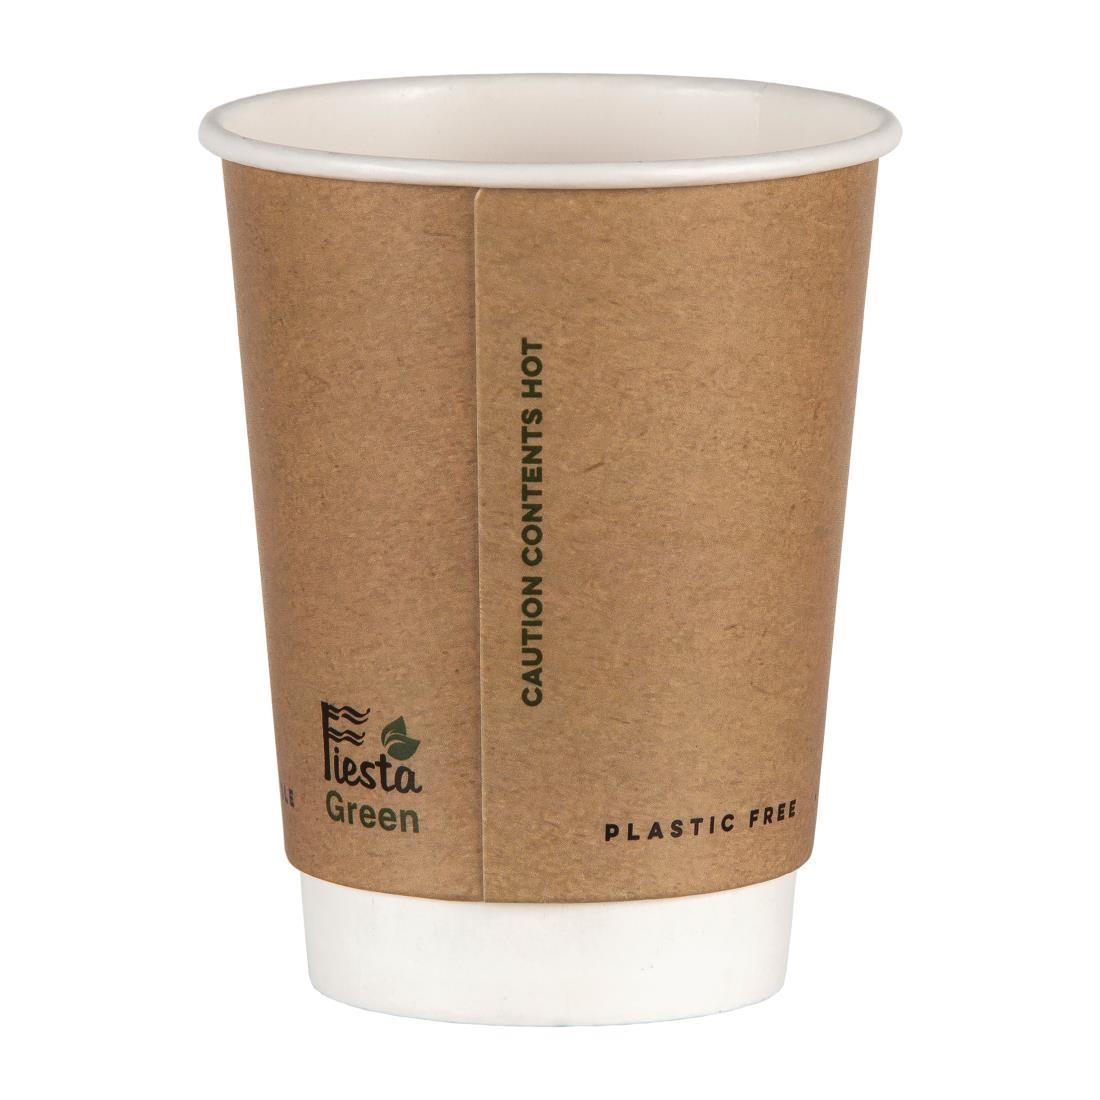 Fiesta Green Plastic-Free Compostable Hot Cups Double Wall 340ml / 12oz x 500 - FB953  - 5